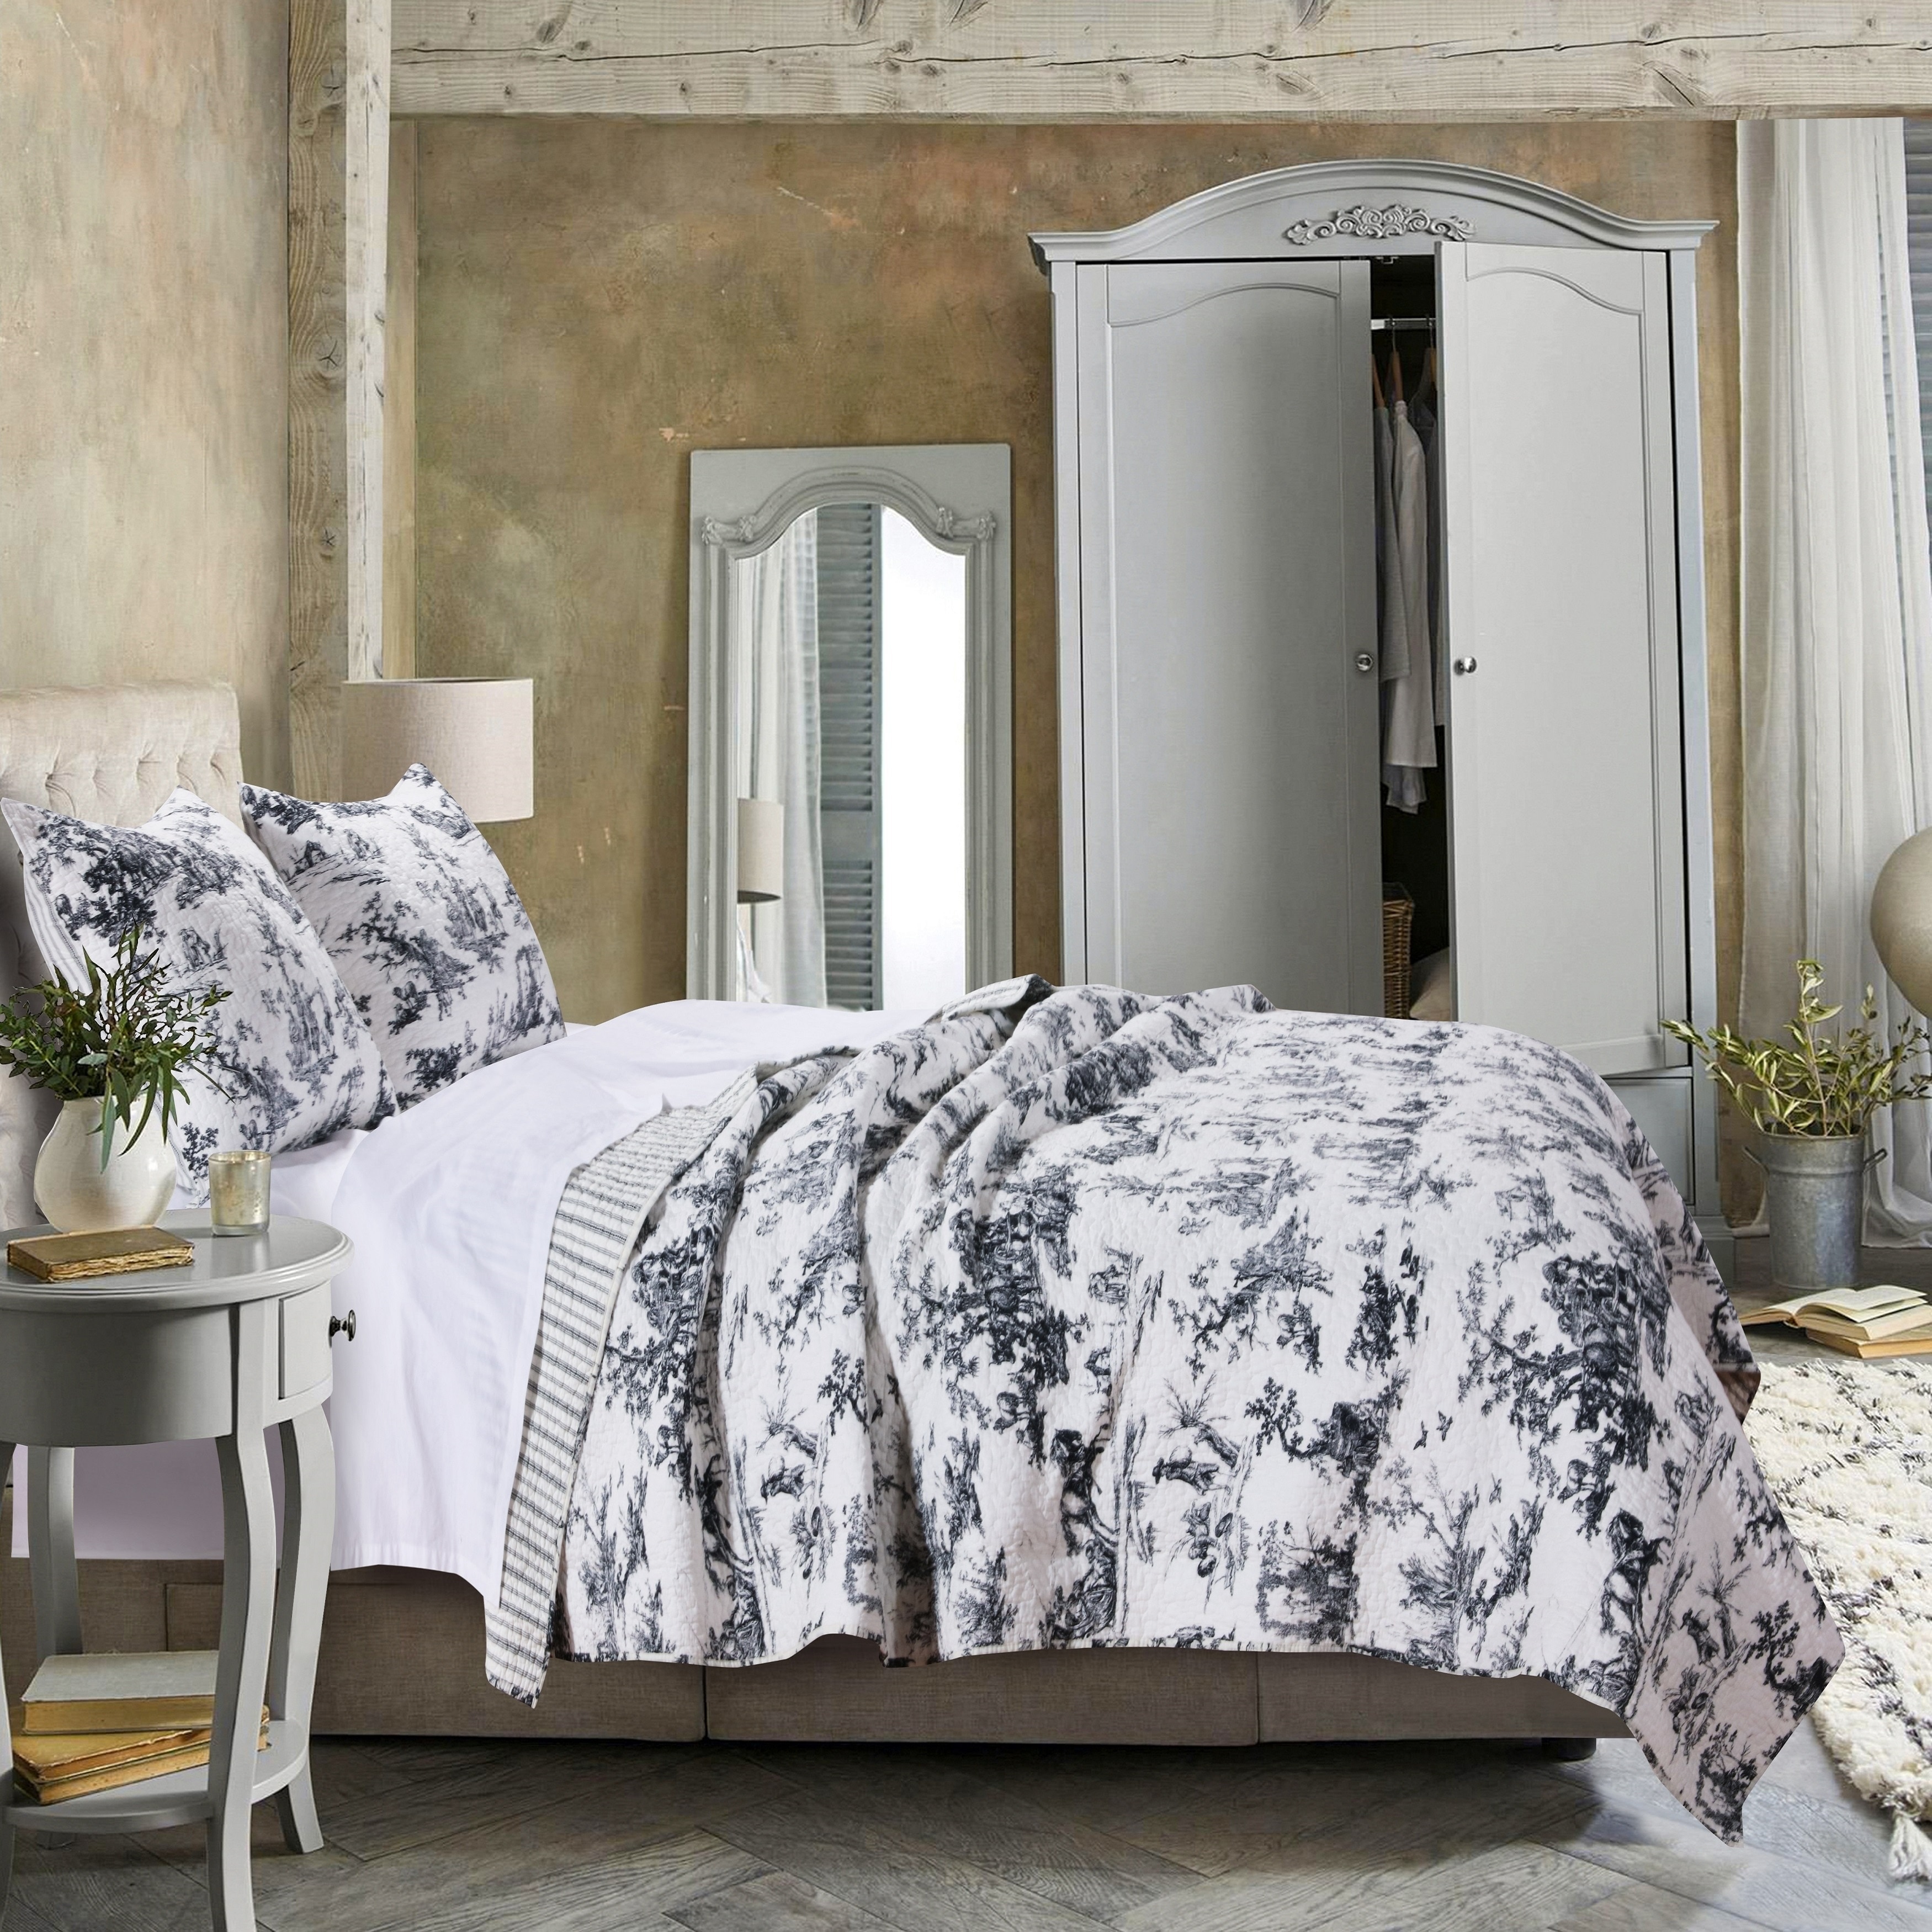 Black Toile Bedding : Kindred Style French Country Bedroom Country Bedroom Furniture French Country Bedrooms Country Style Bedroom : 4.6 out of 5 stars 39.